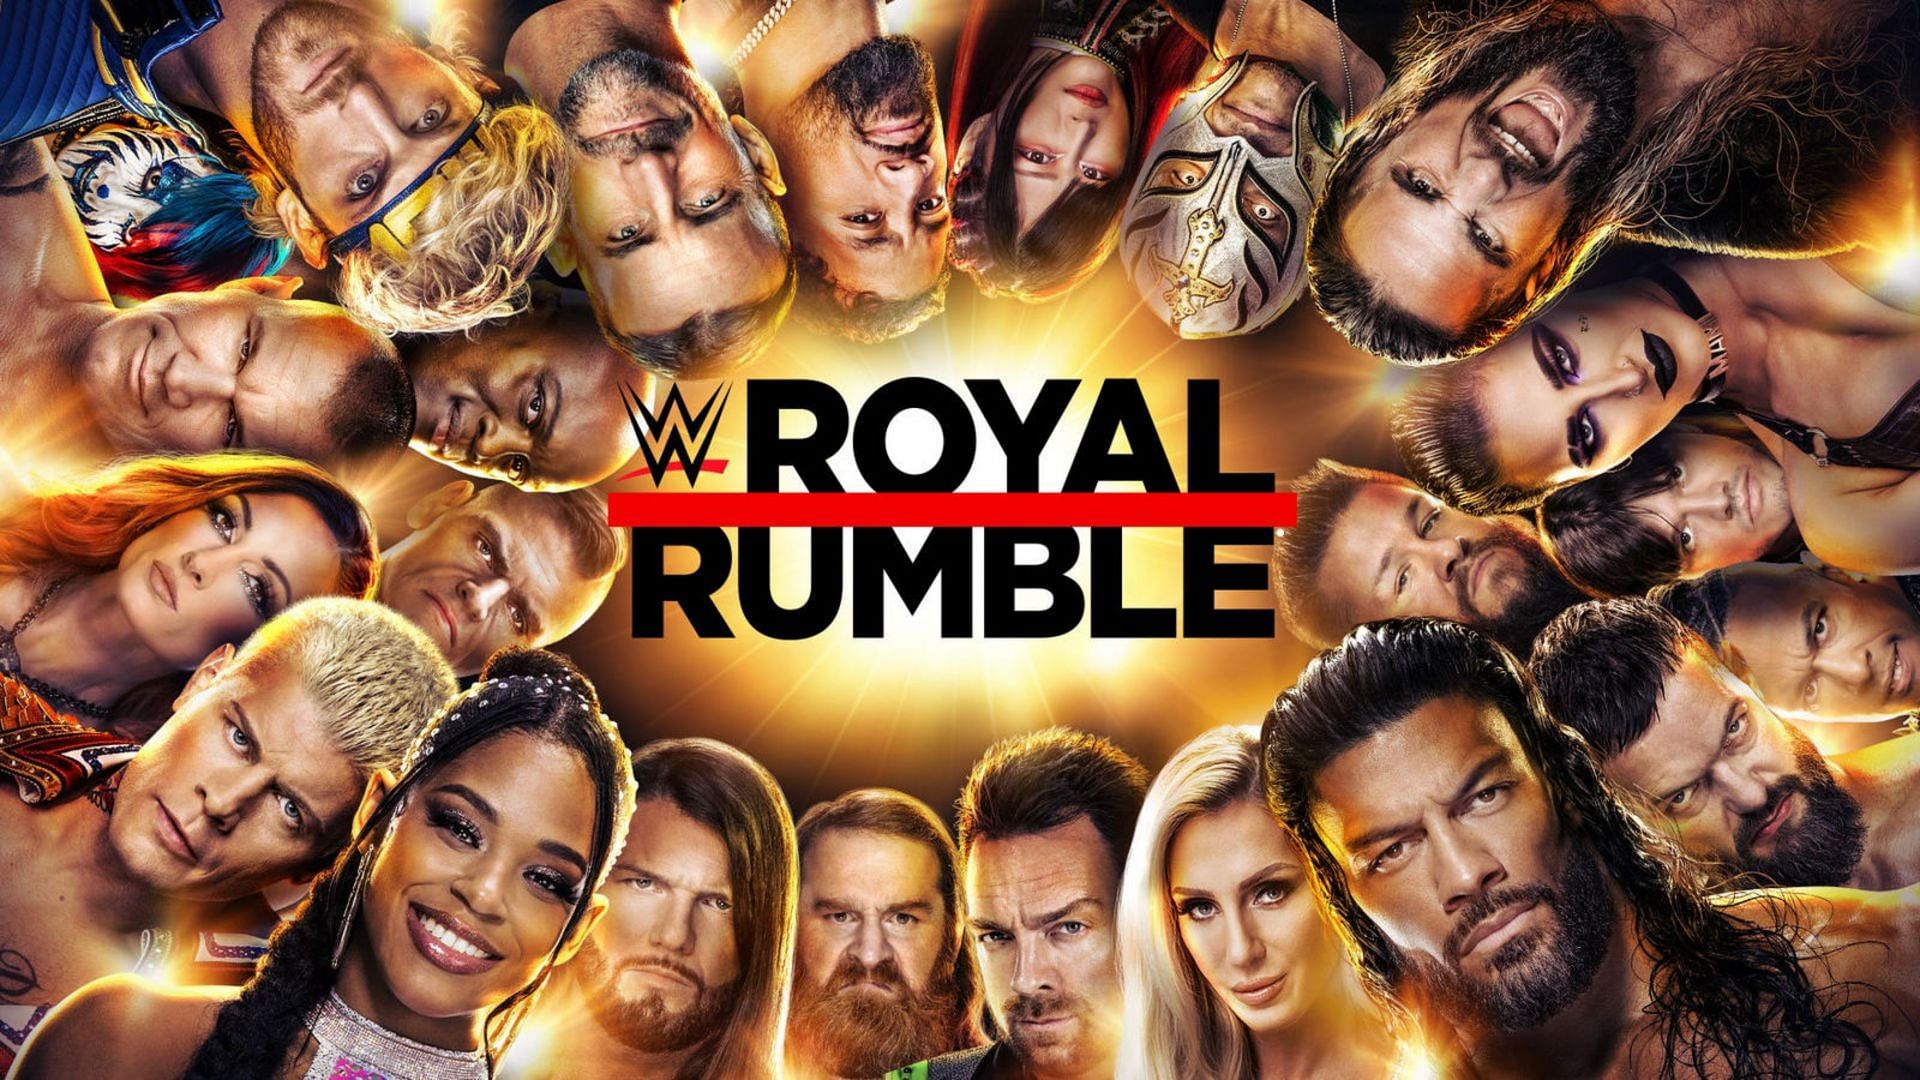 Cody Rhodes, CM Punk, and several other WWE Superstars have declared for the Royal Rumble